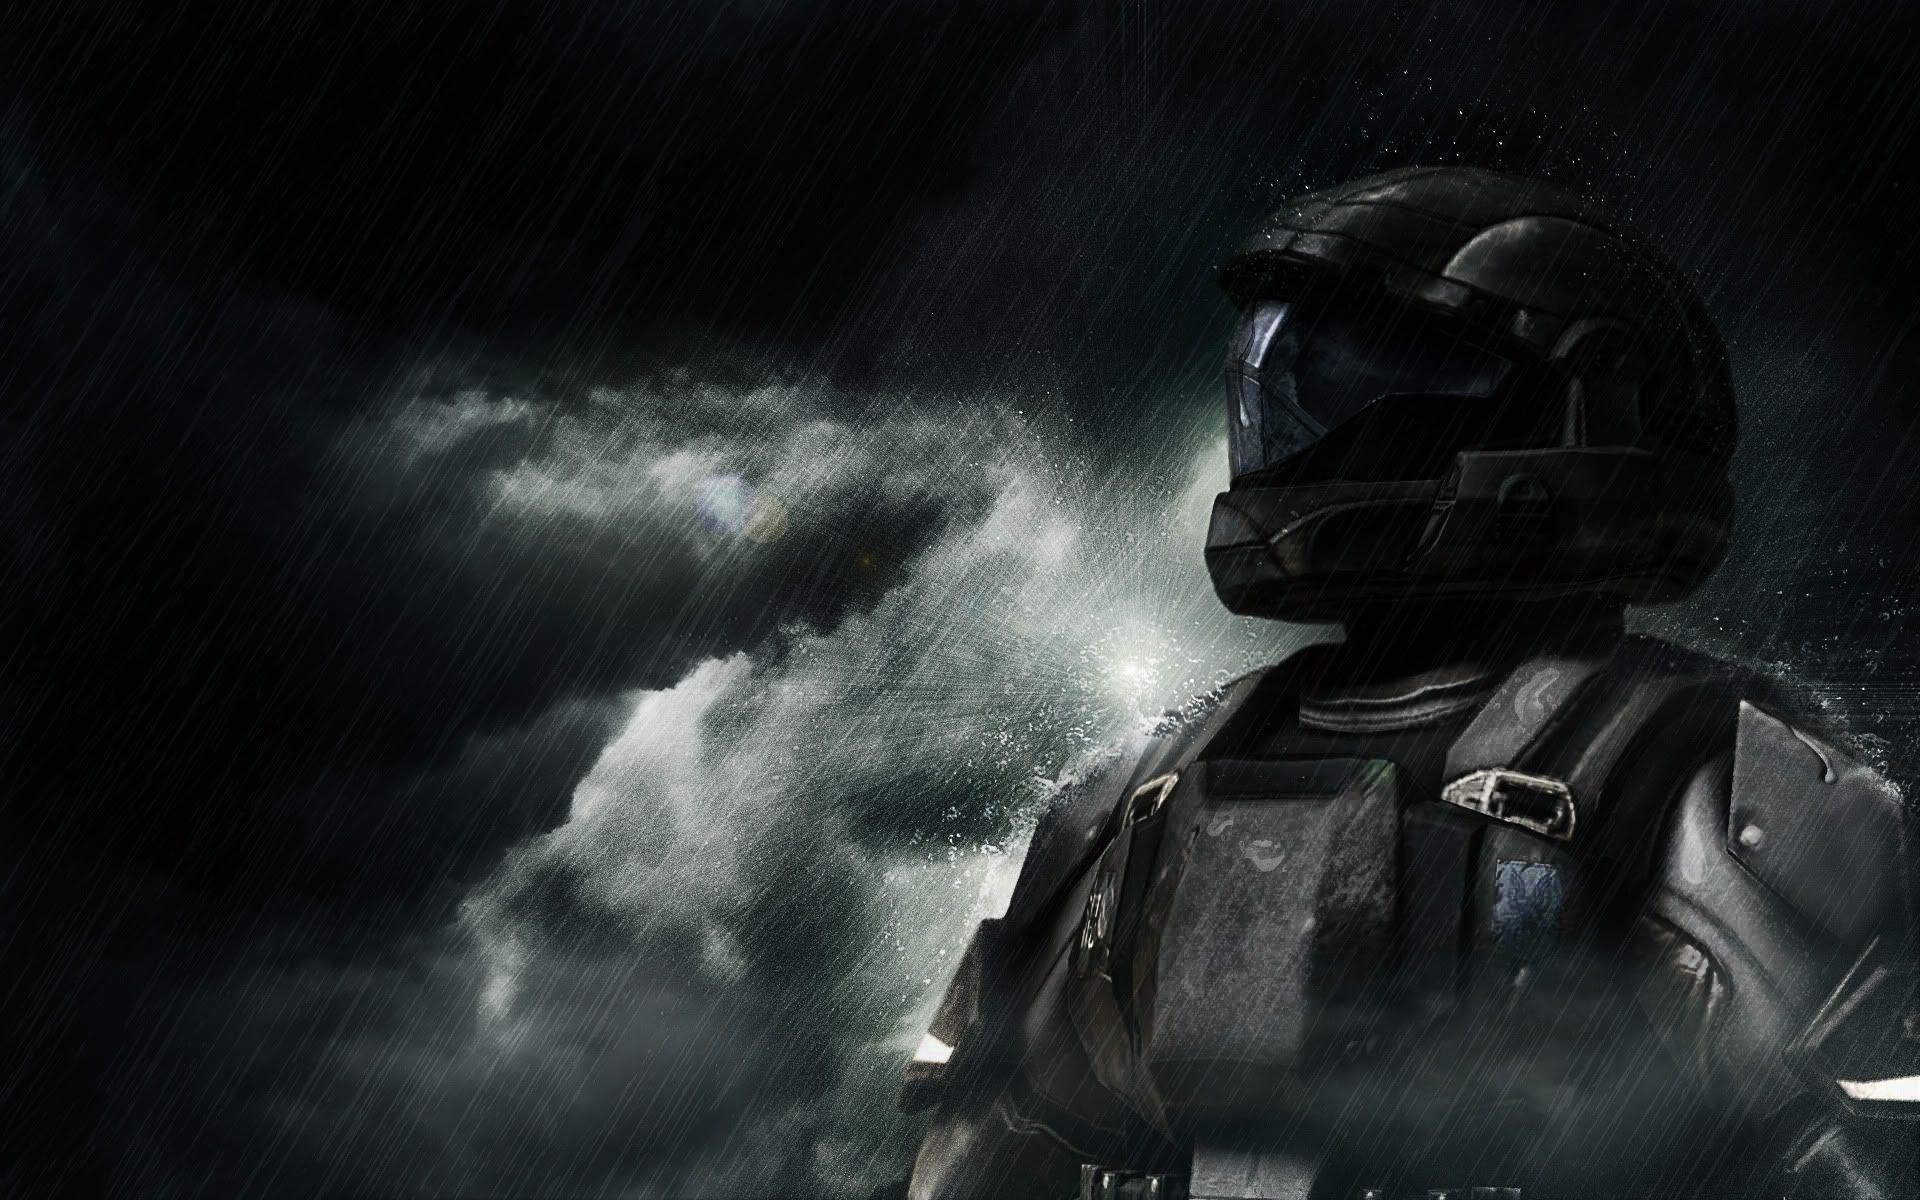 Halo 3 Odst Wallpaper Master Chief